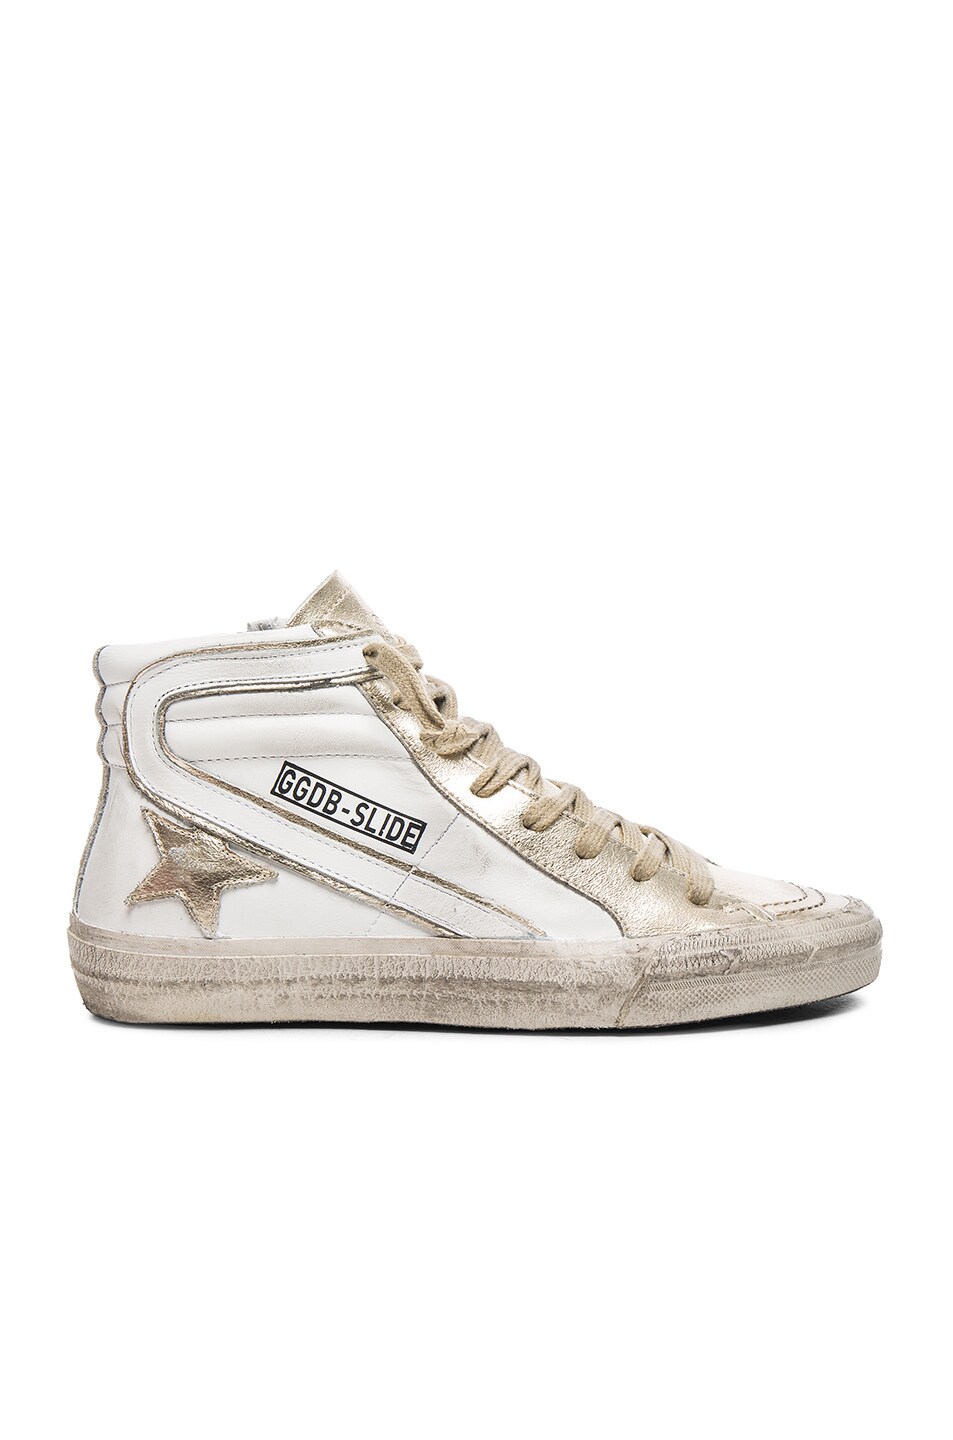 Golden Goose Leather Slide Sneakers in White & Gold | FWRD